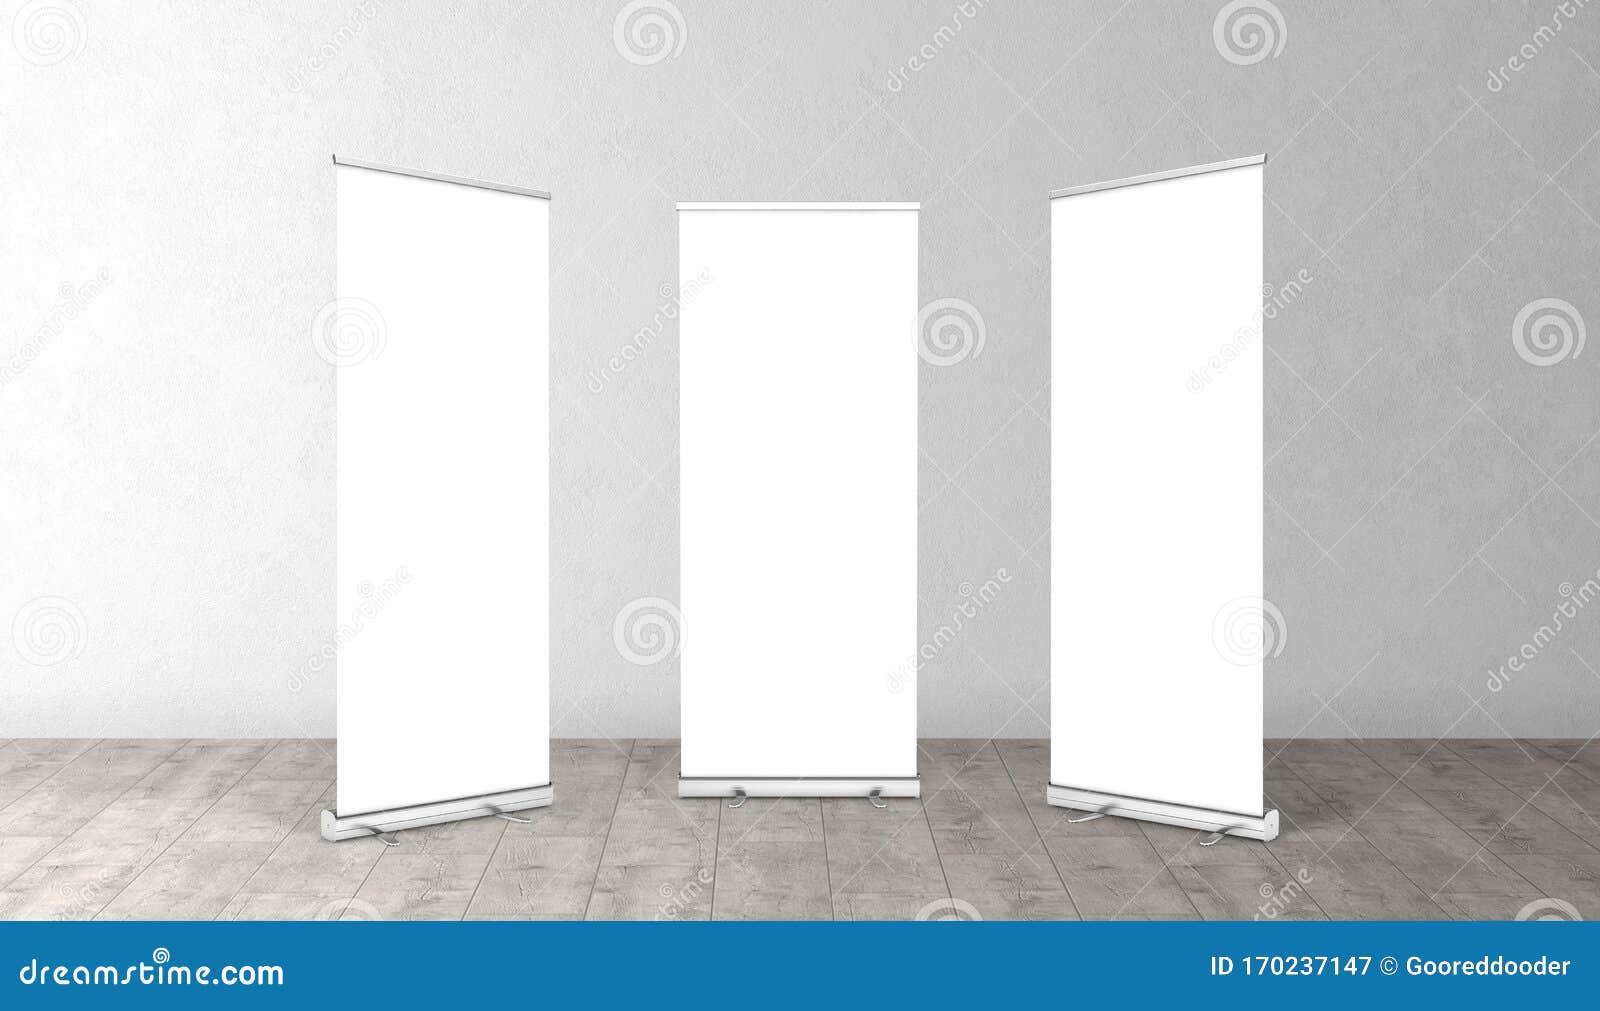 vertical empty white roll up for print. rollup banners stand. blank template mockups.